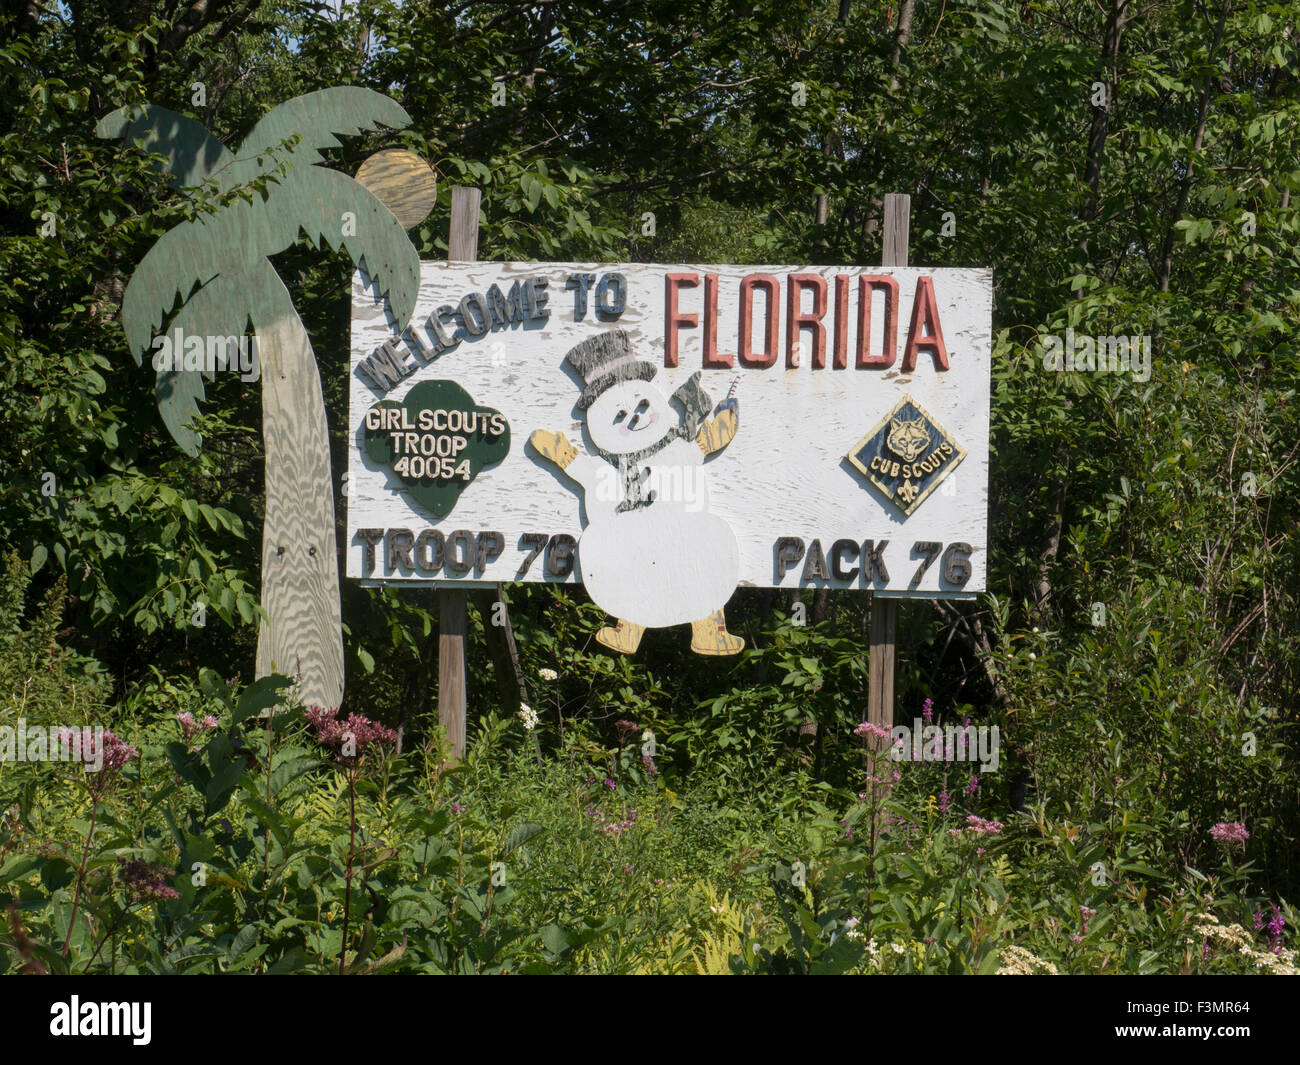 Florida, Massachusetts sign crafted by local scout troops, with the unusual combination of palm tree (none) and snow (lots). Stock Photo